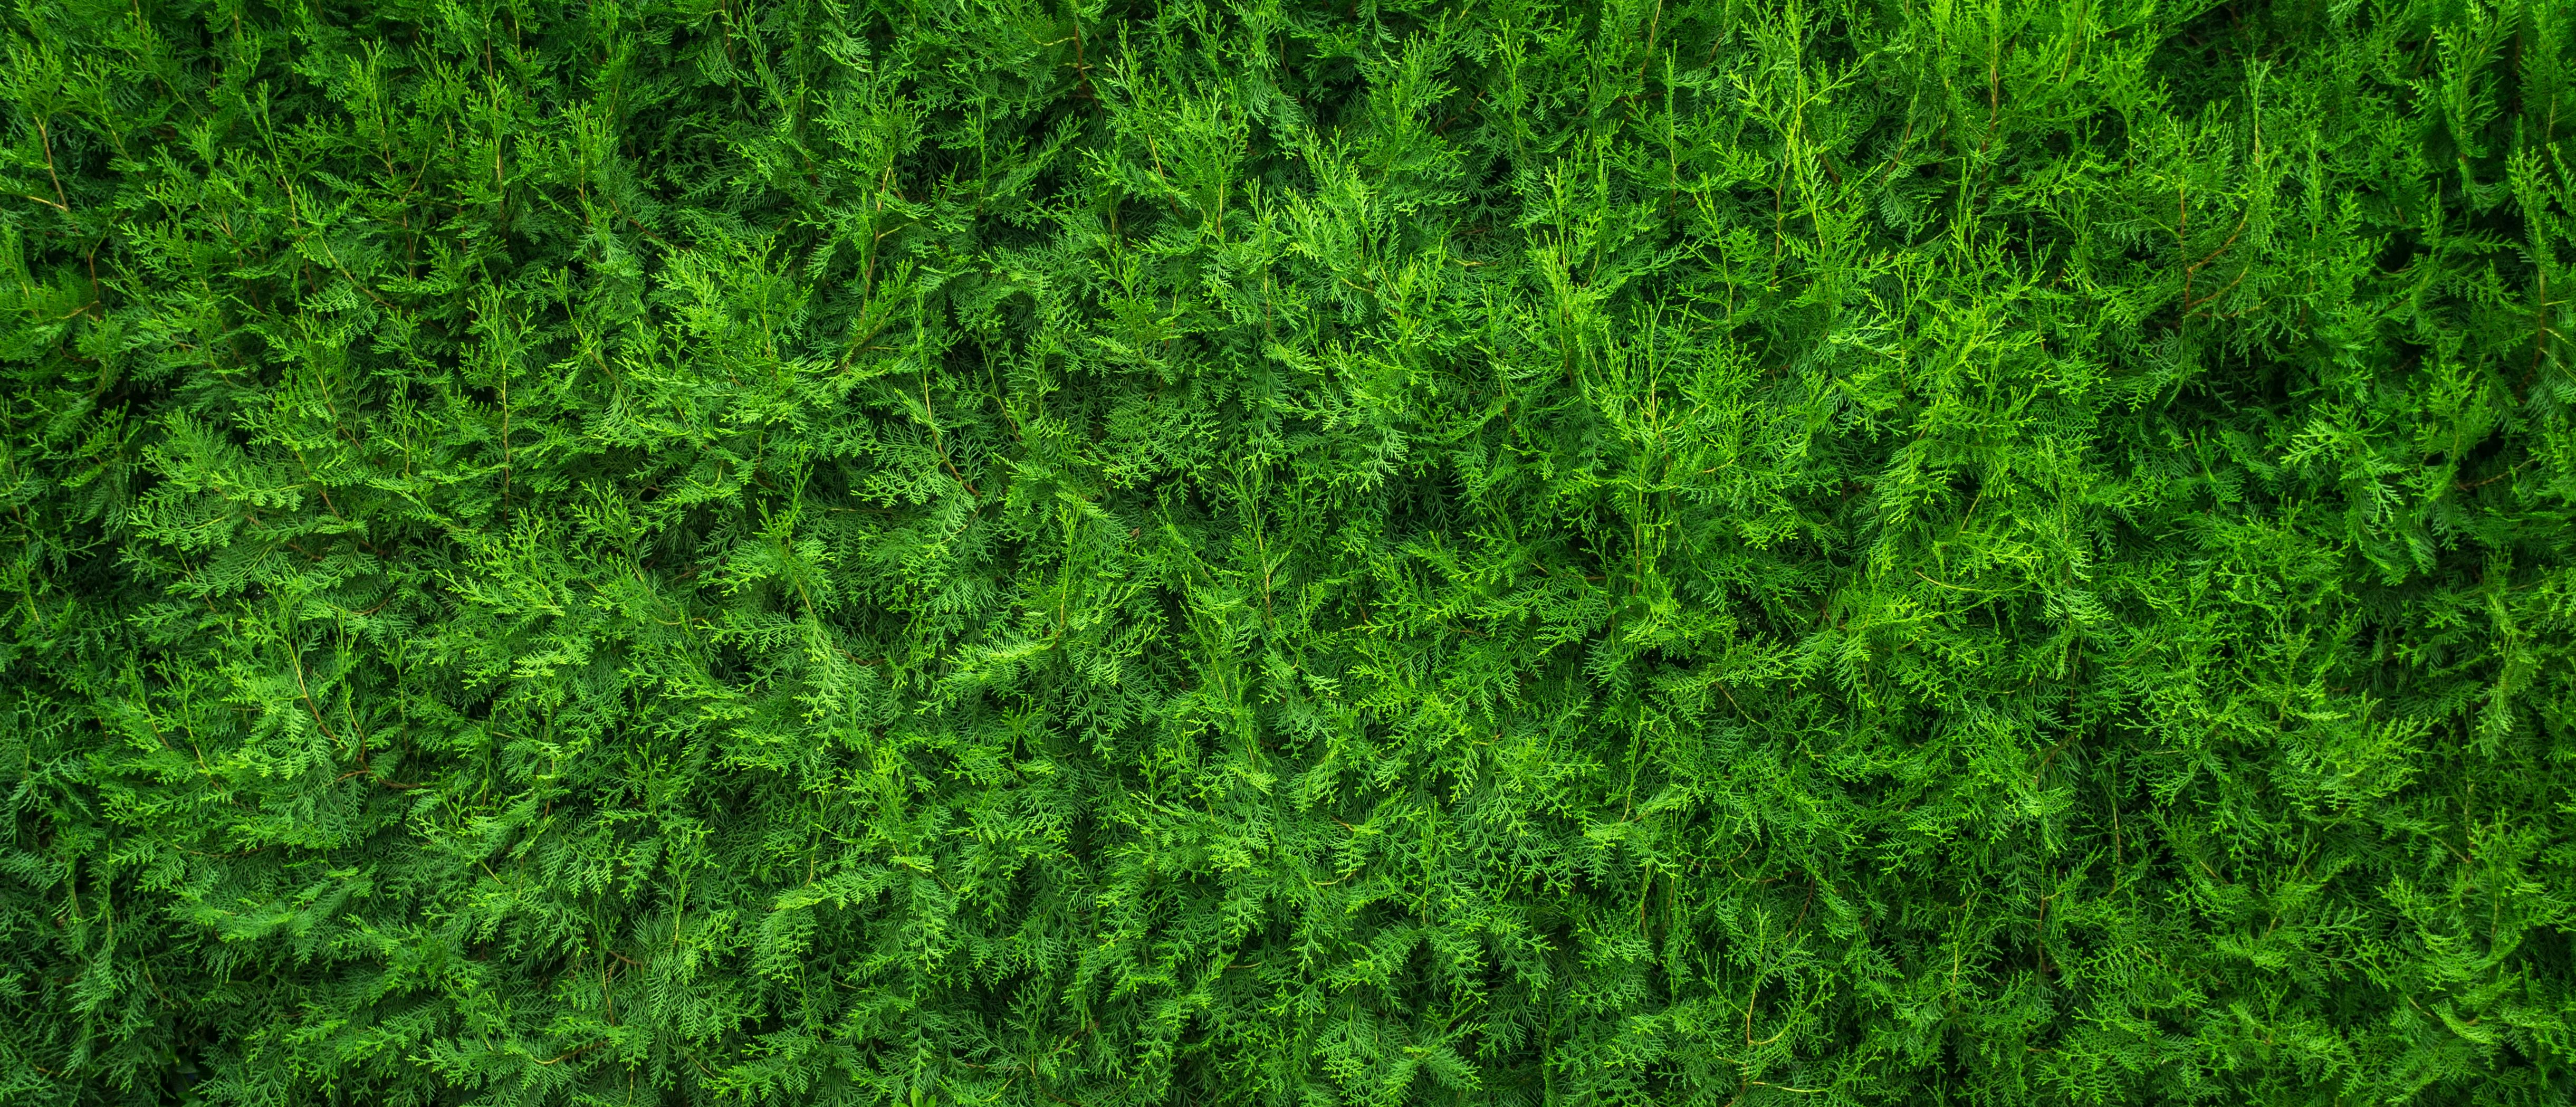 Free stock photo of close-up, green, nature